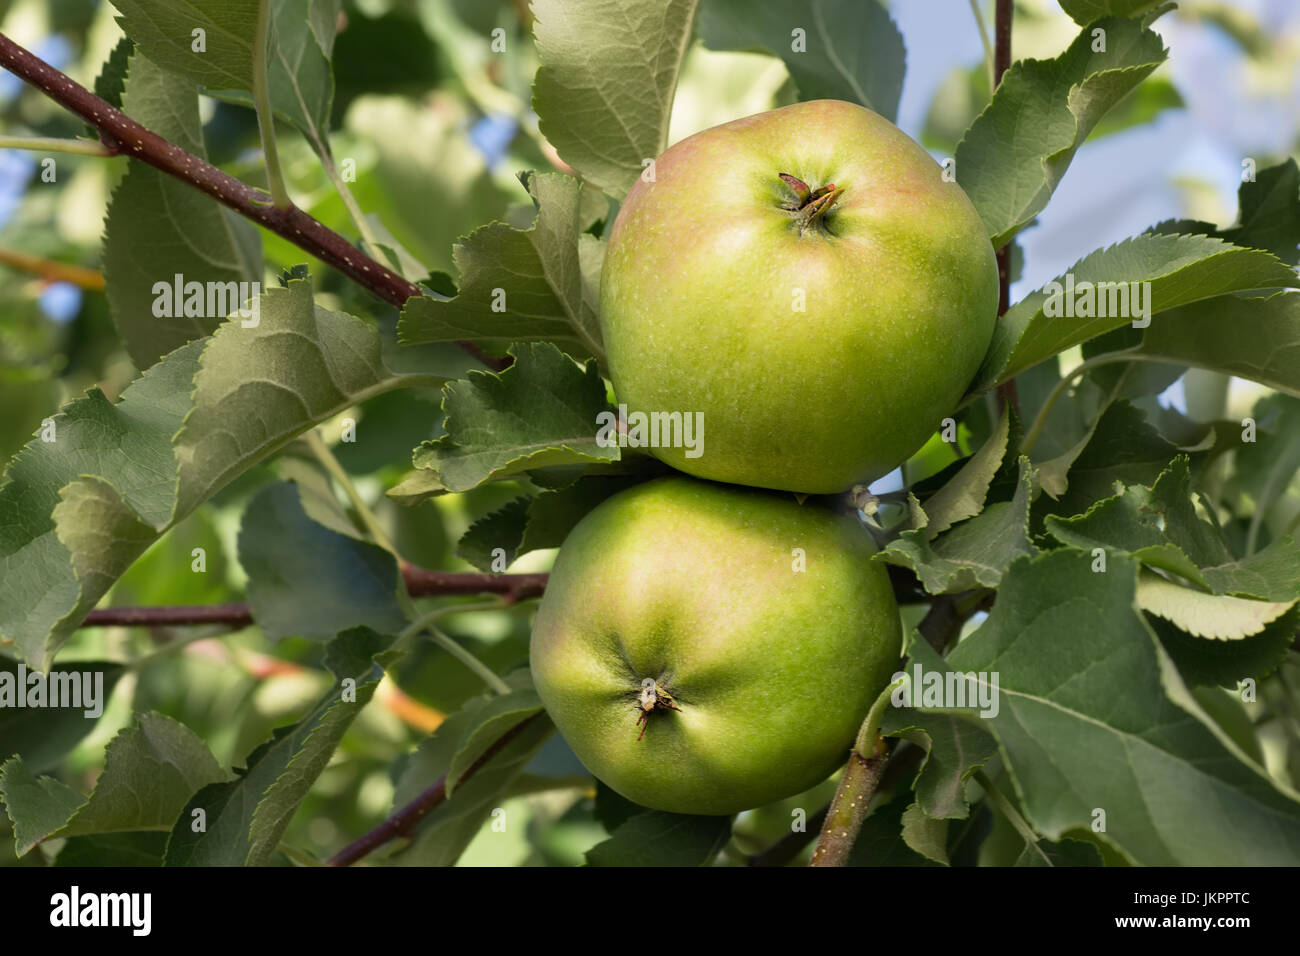 green apples on a branch Stock Photo